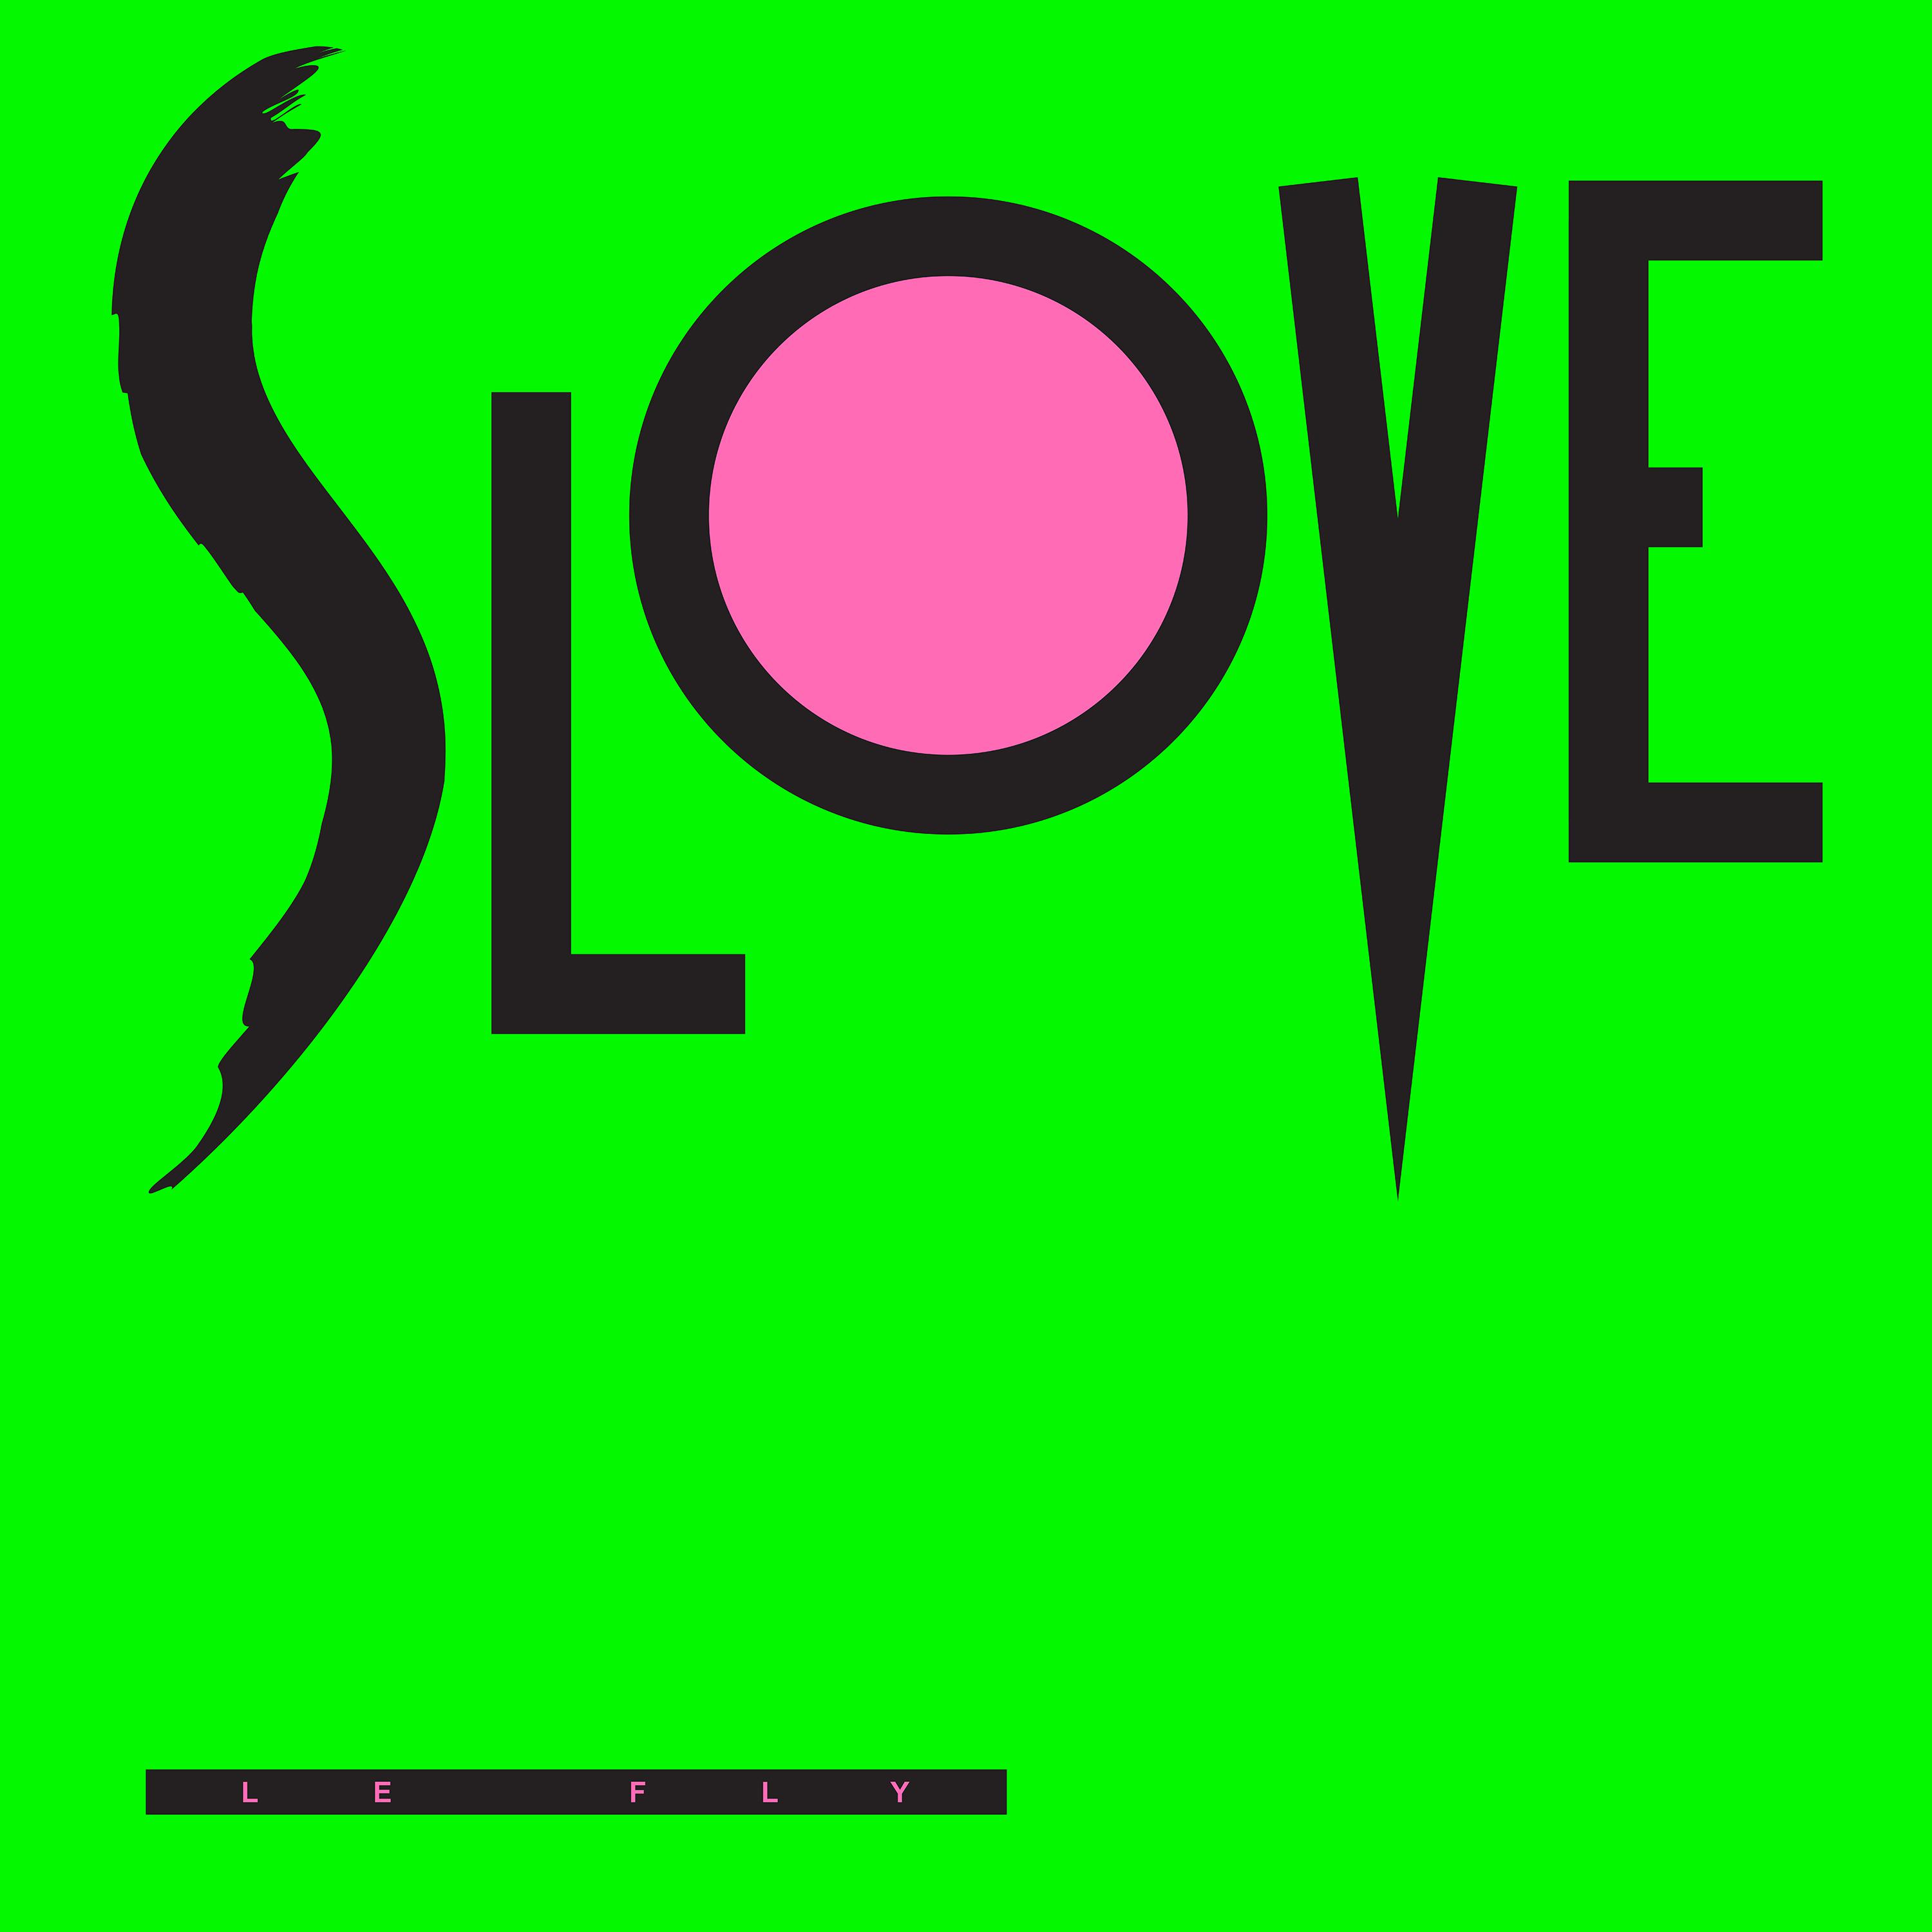 slove - (There's a) Star in Your Eyes